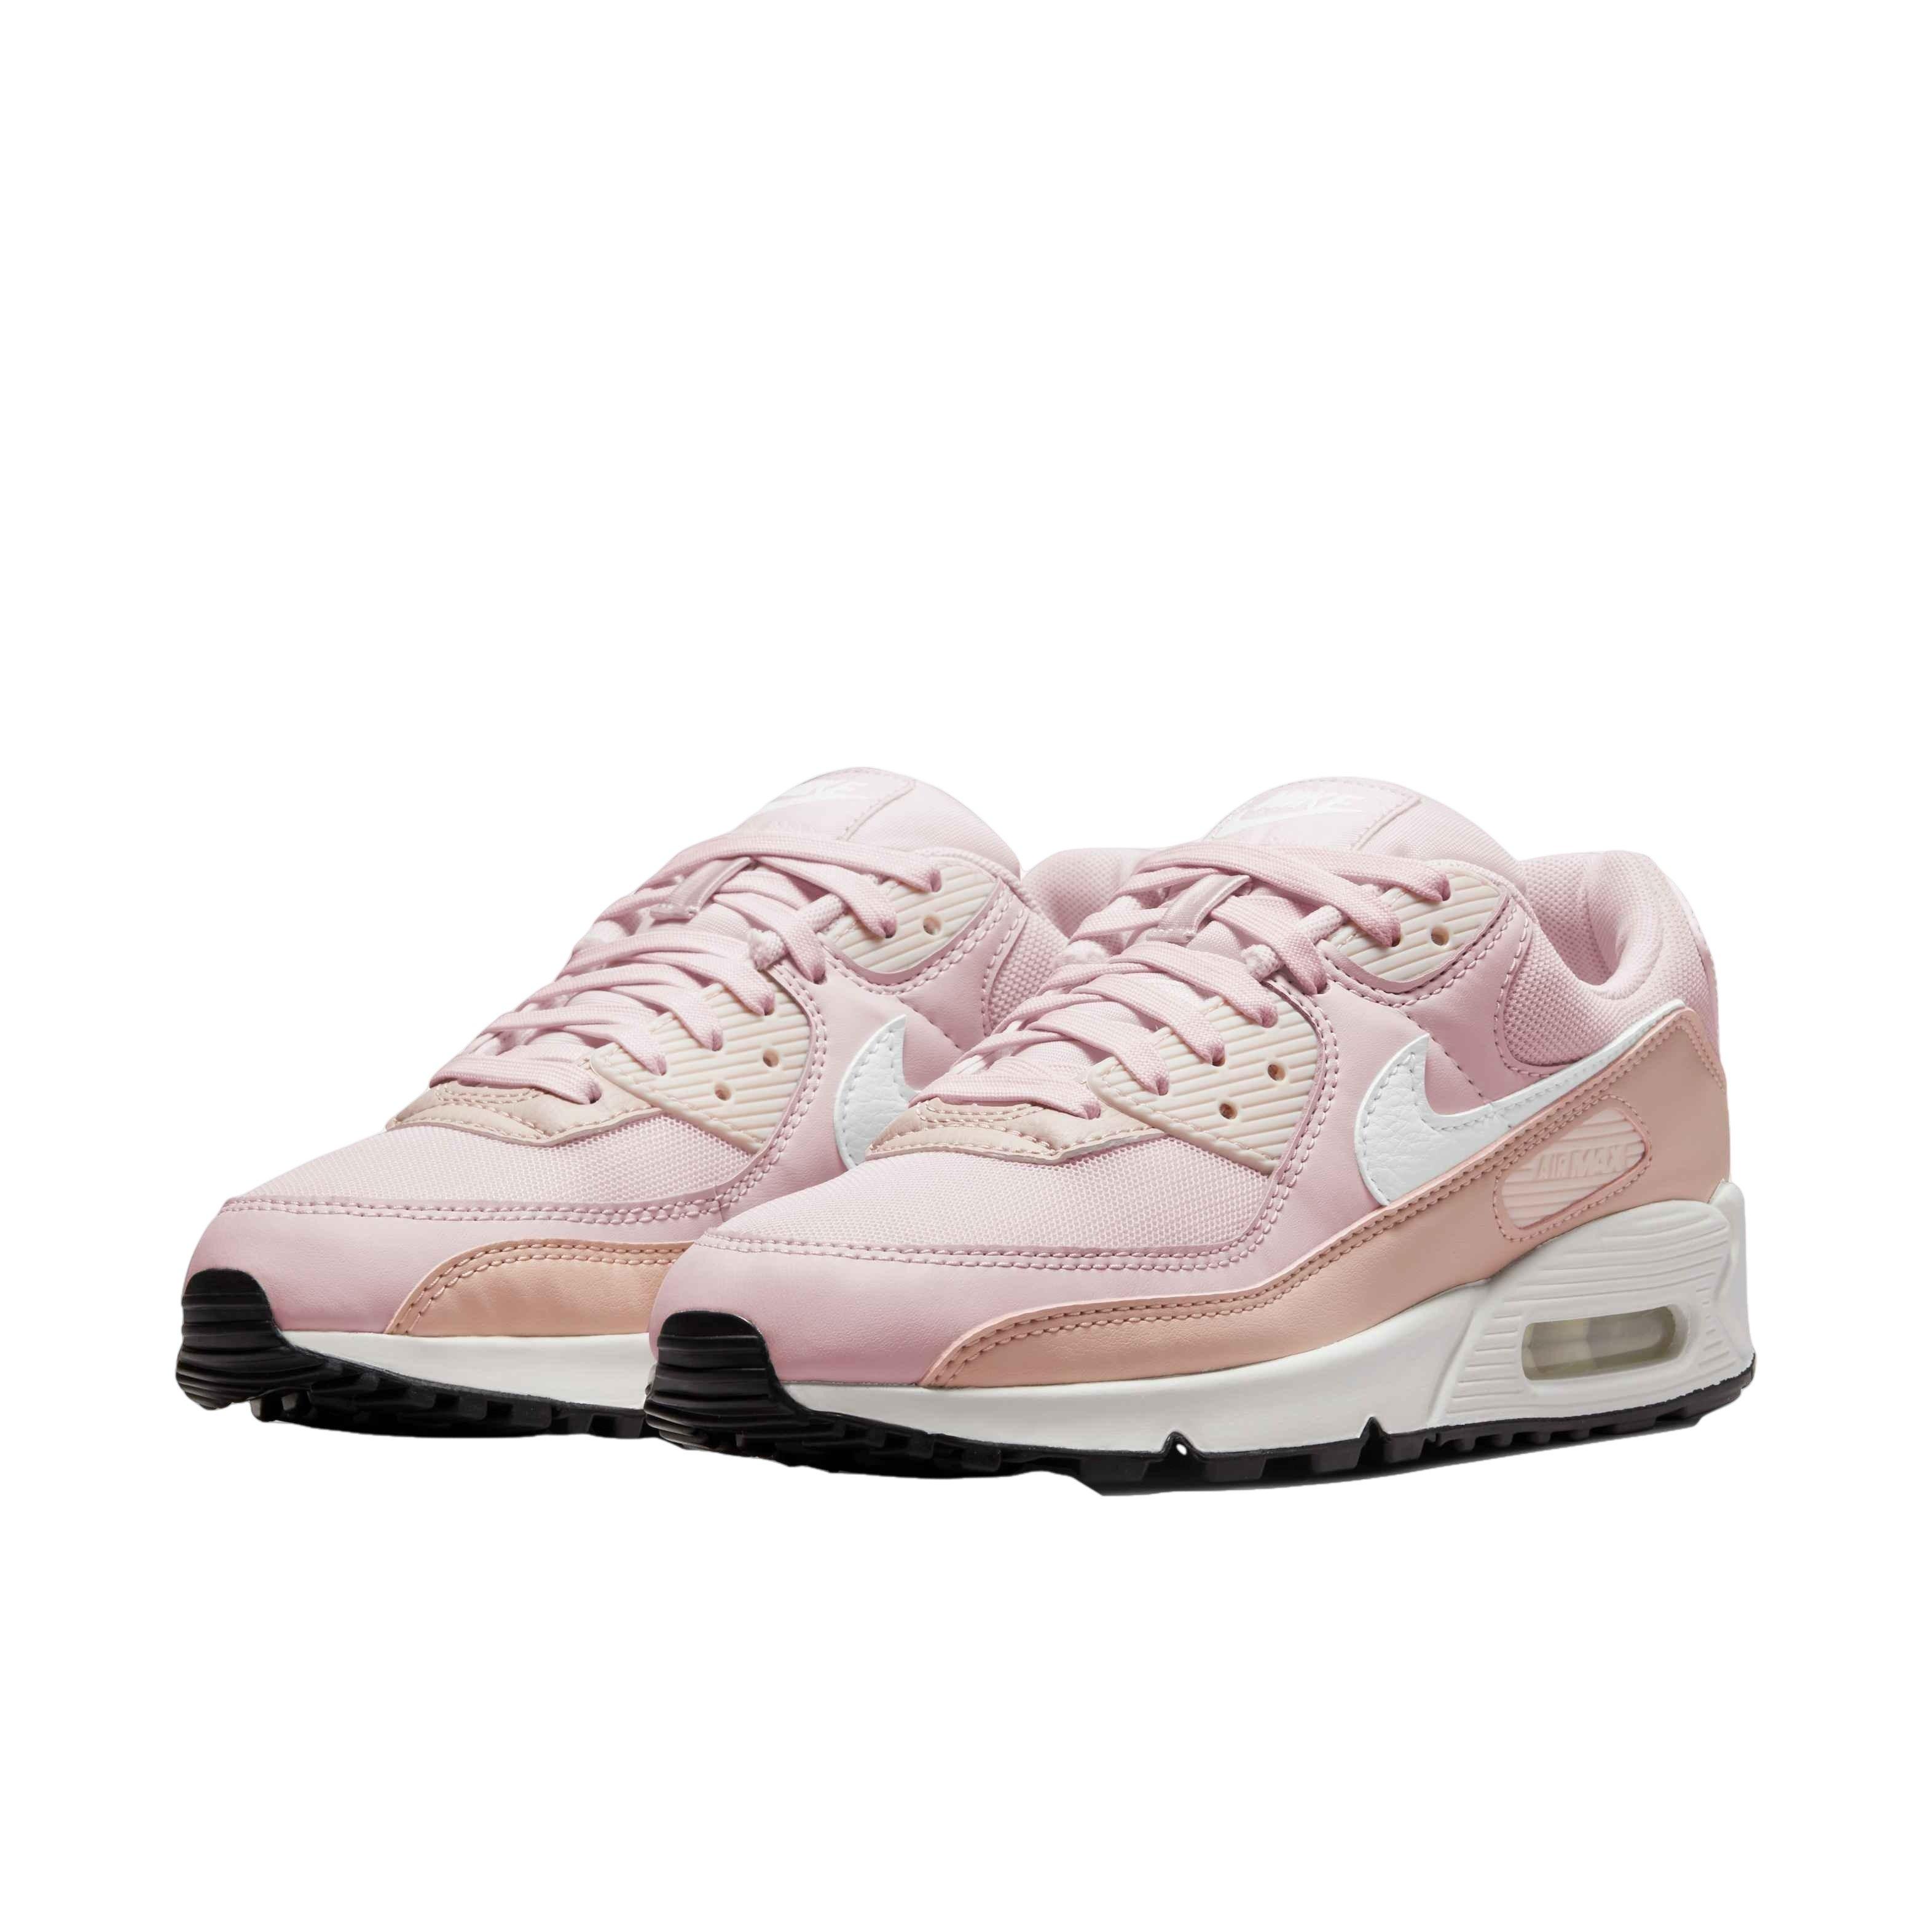 Nike Air 90 "Barely White/Pink Women's Shoe